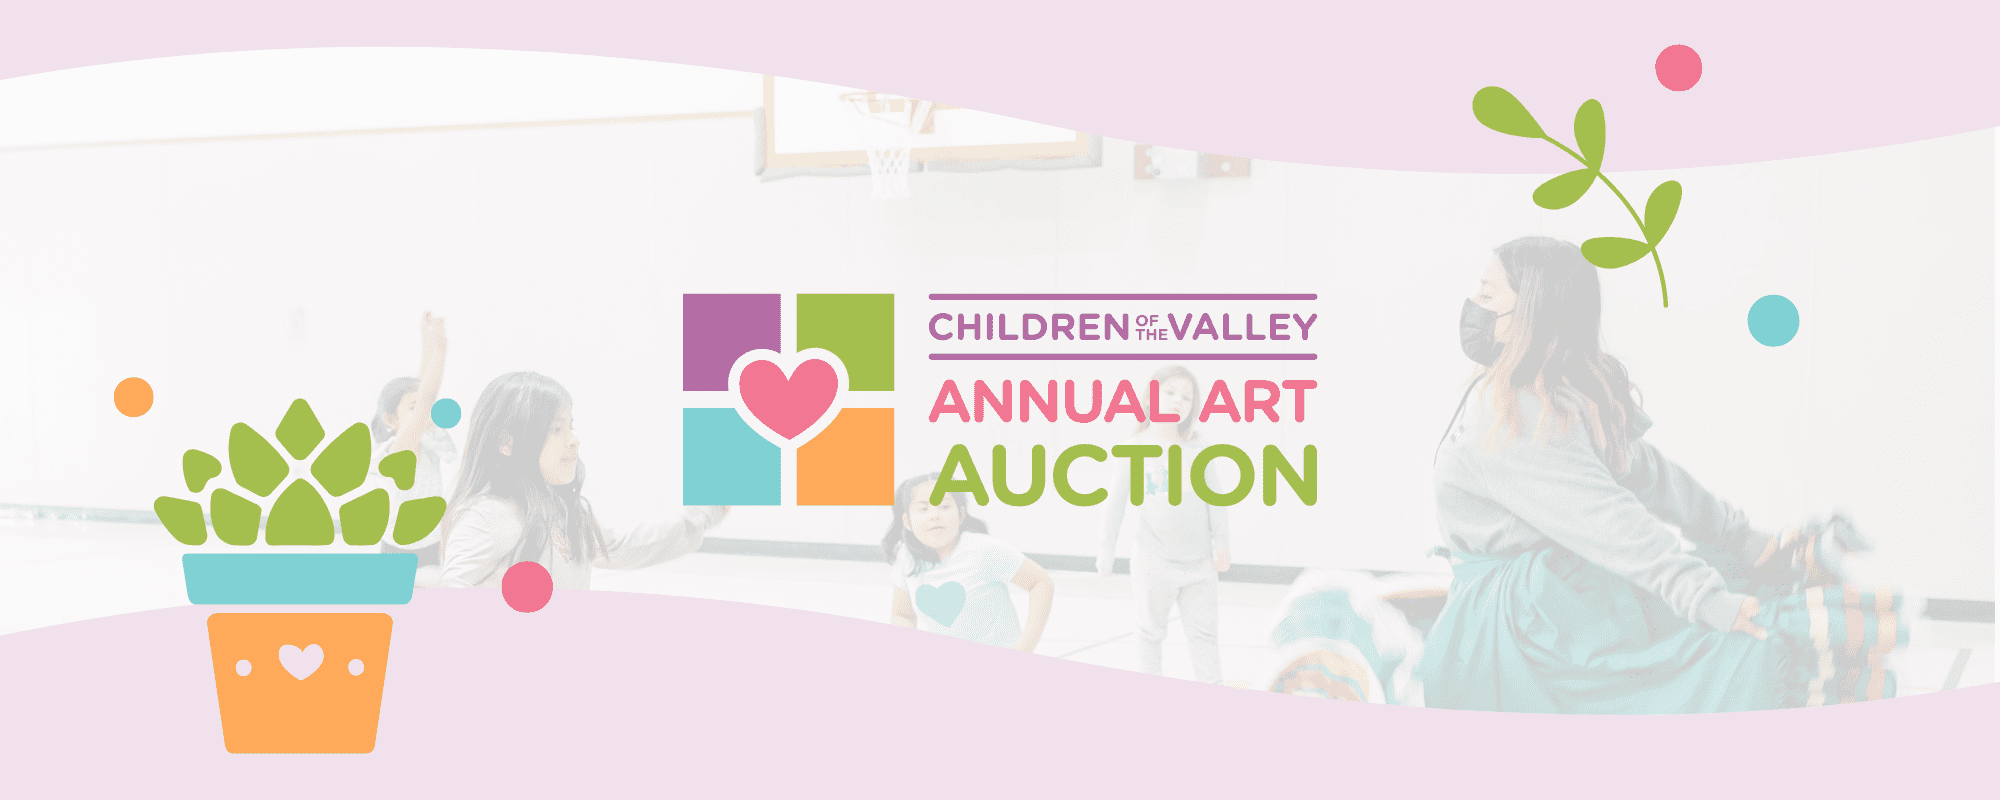 children of the valley annual art auction